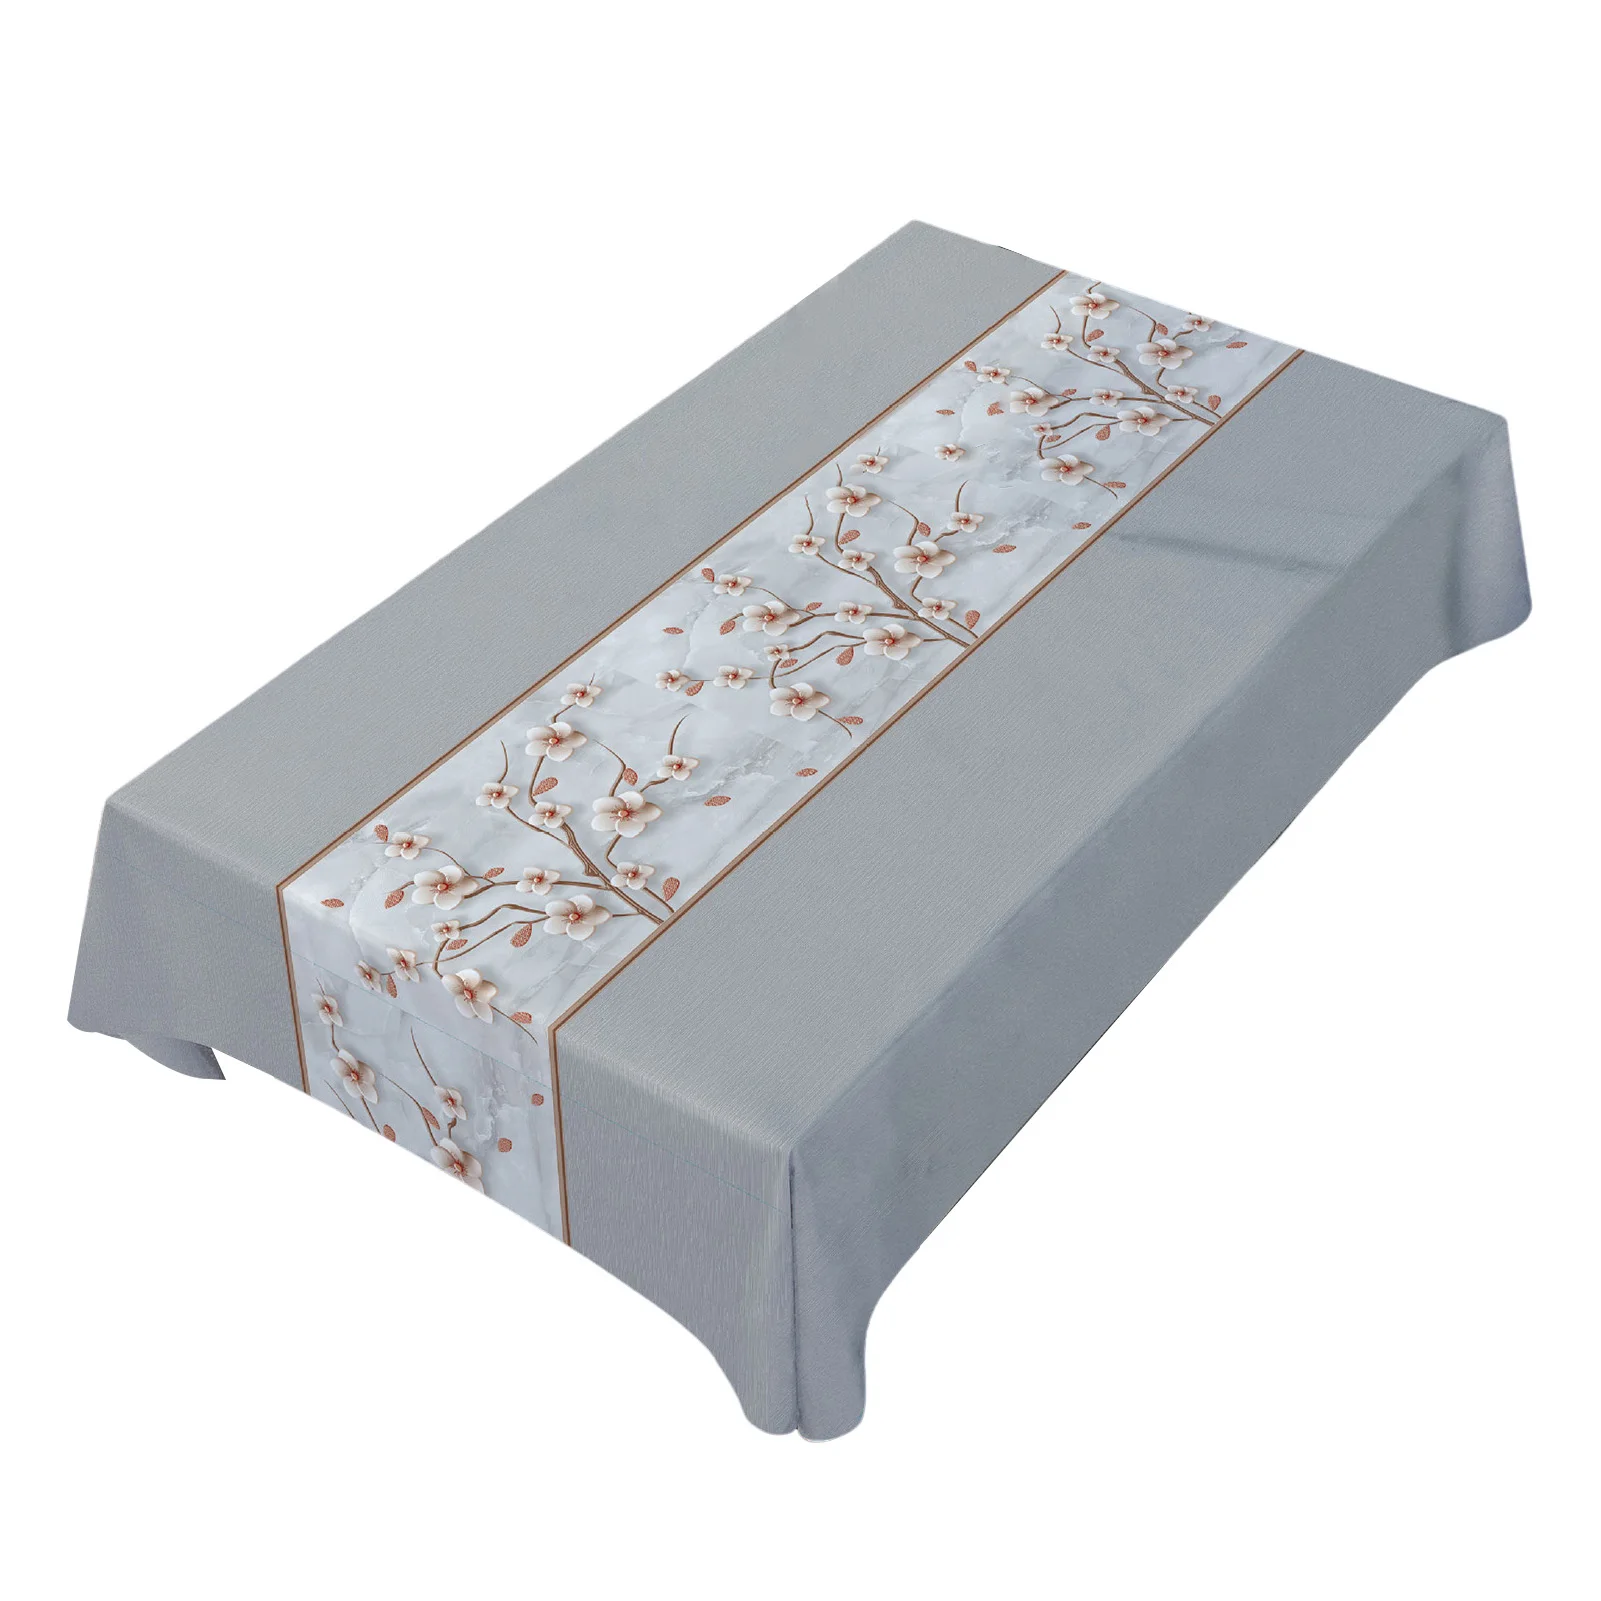 

Polyester Vinyl Thicken Tablecloth Cover Coffee Meeting Table Mat Pad for Kitchen Dining Party Banquet